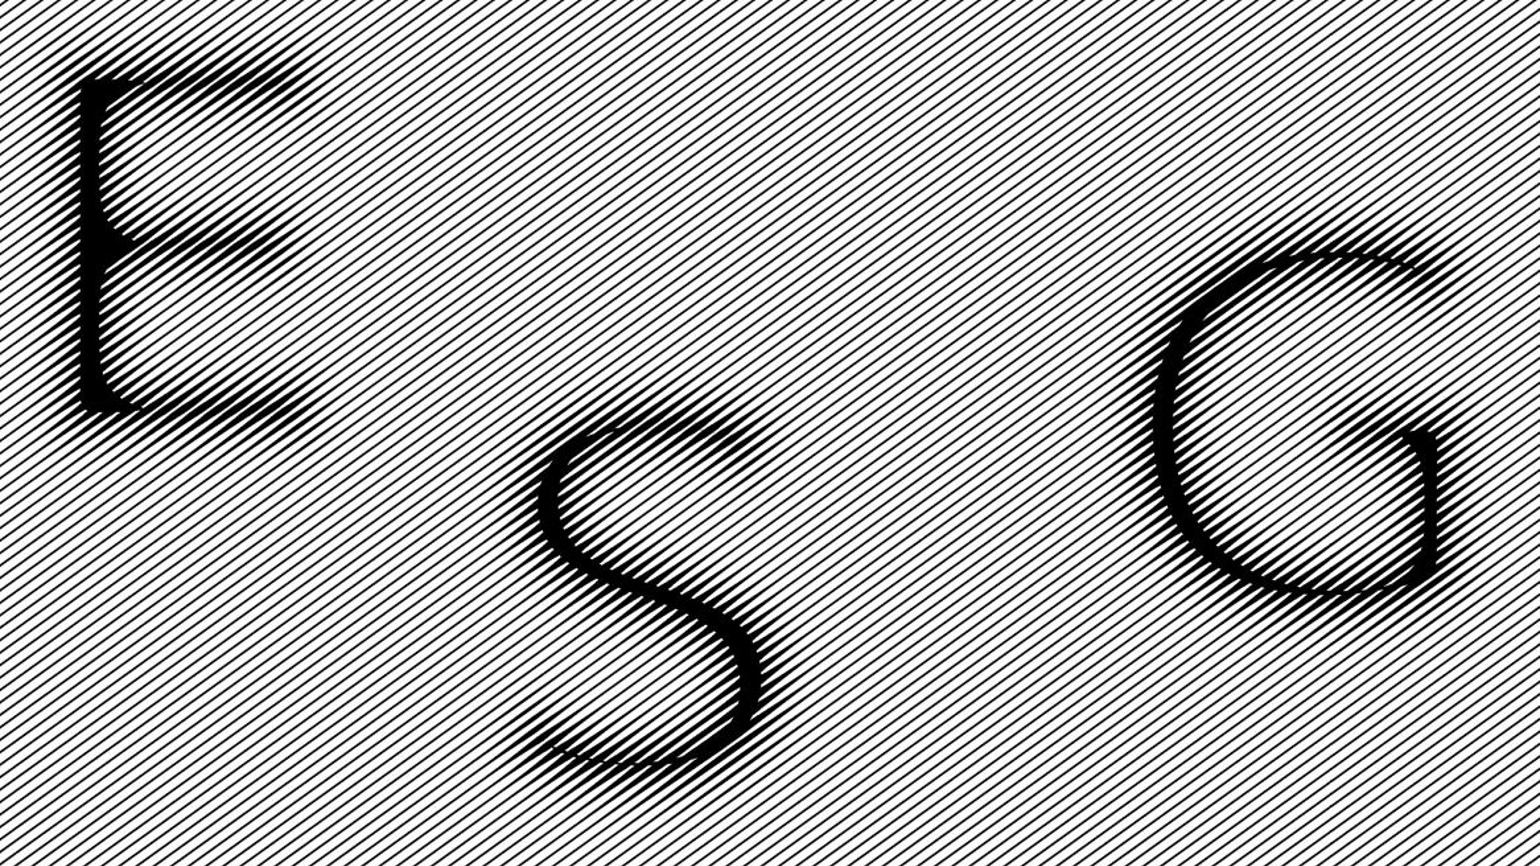 Black and white graphic featuring the letters 'ESG'